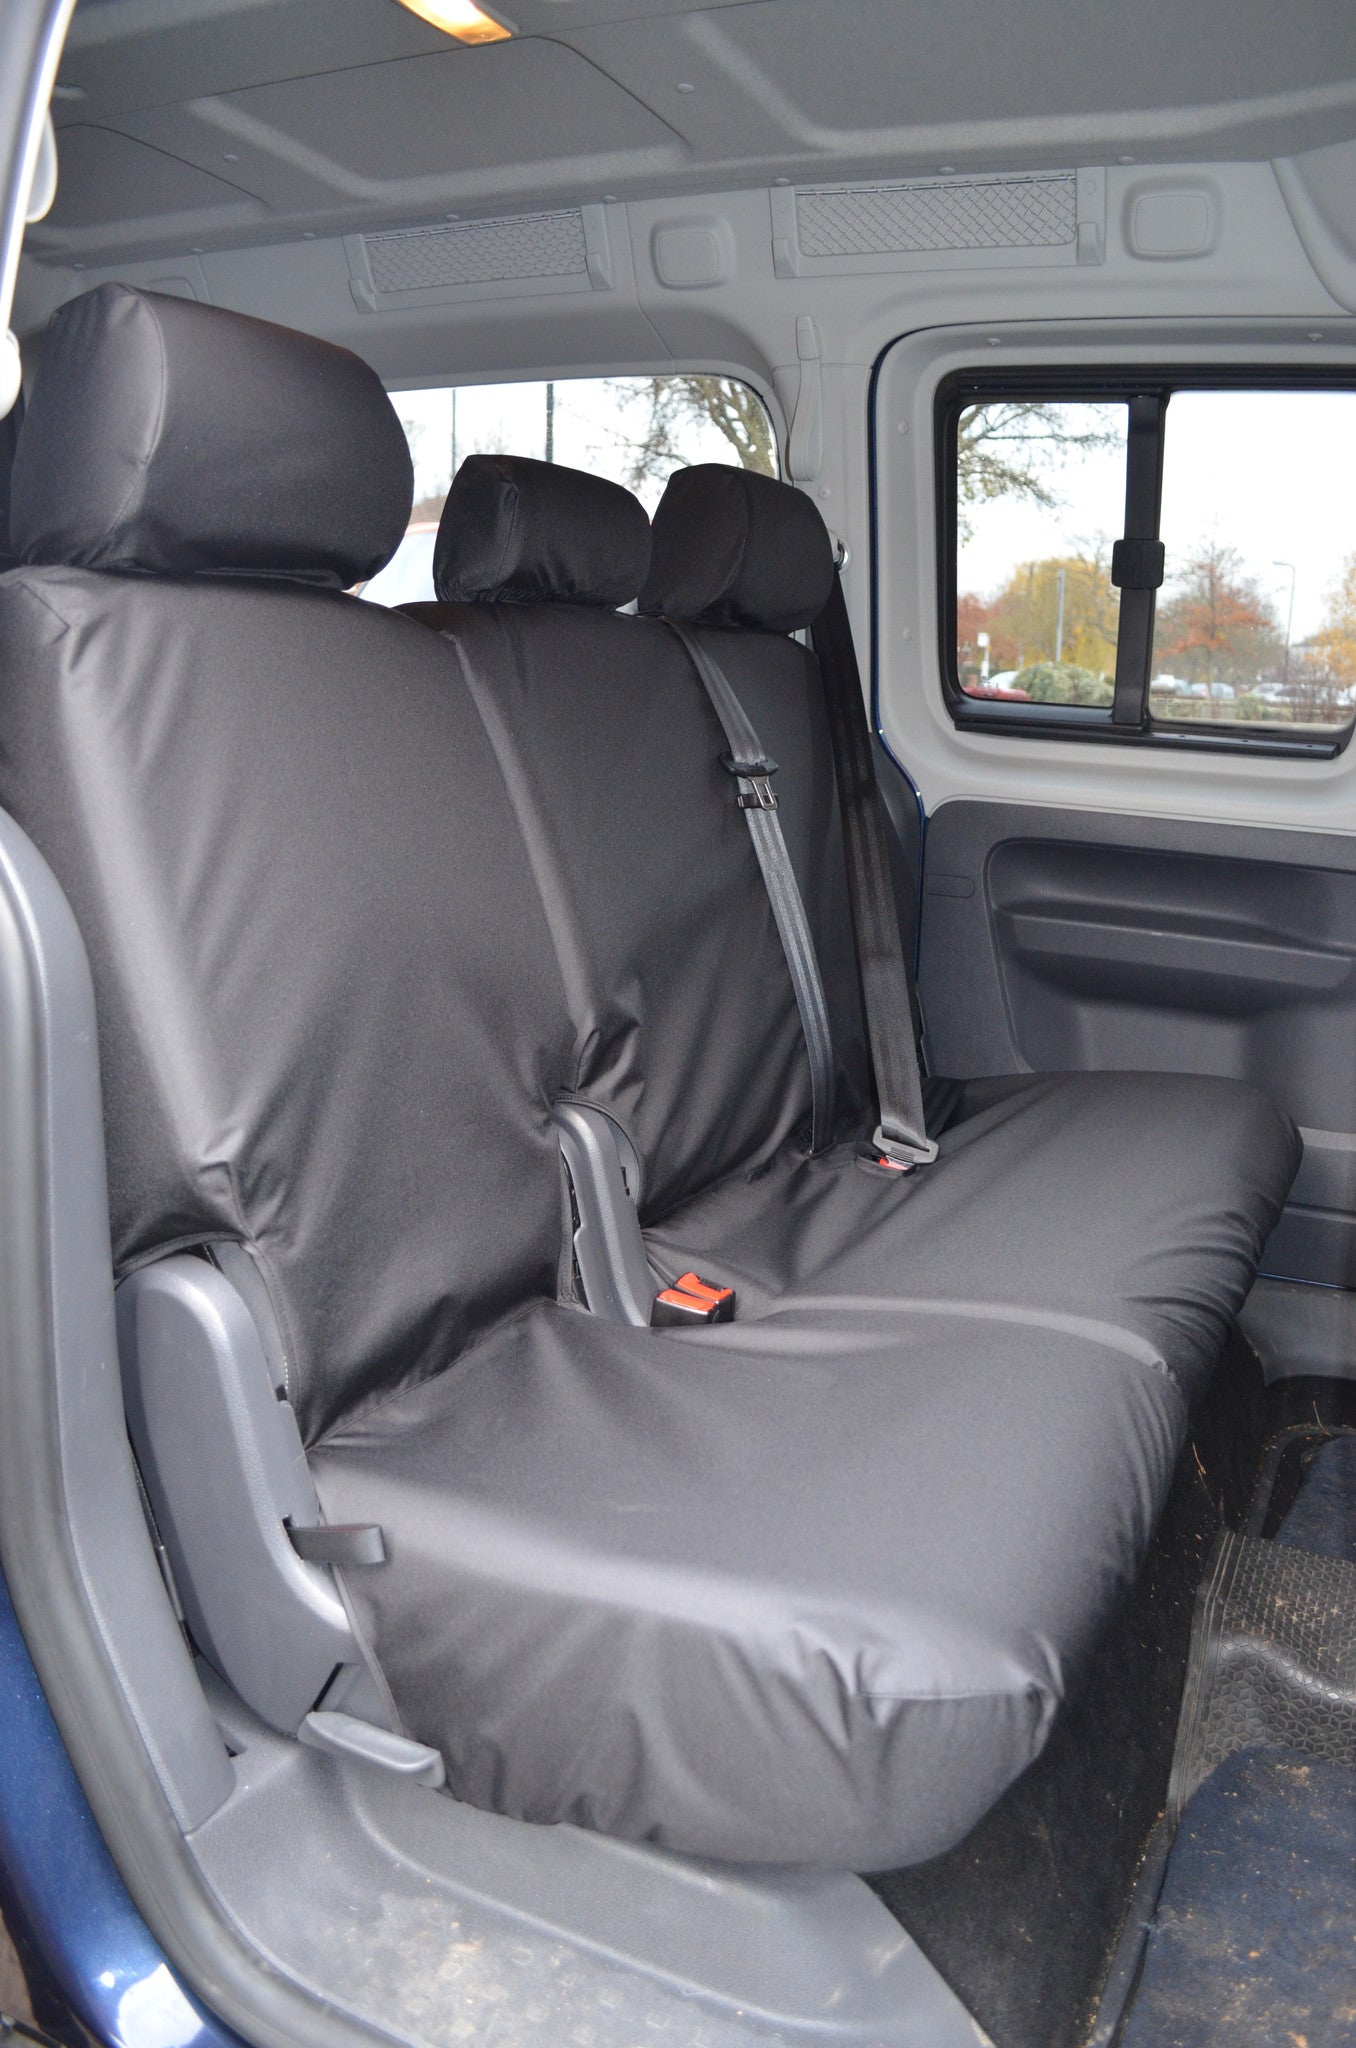 Volkswagen Caddy 2004 Onwards Seat Covers 2nd Row Single &amp; Double Seats / Black Turtle Covers Ltd